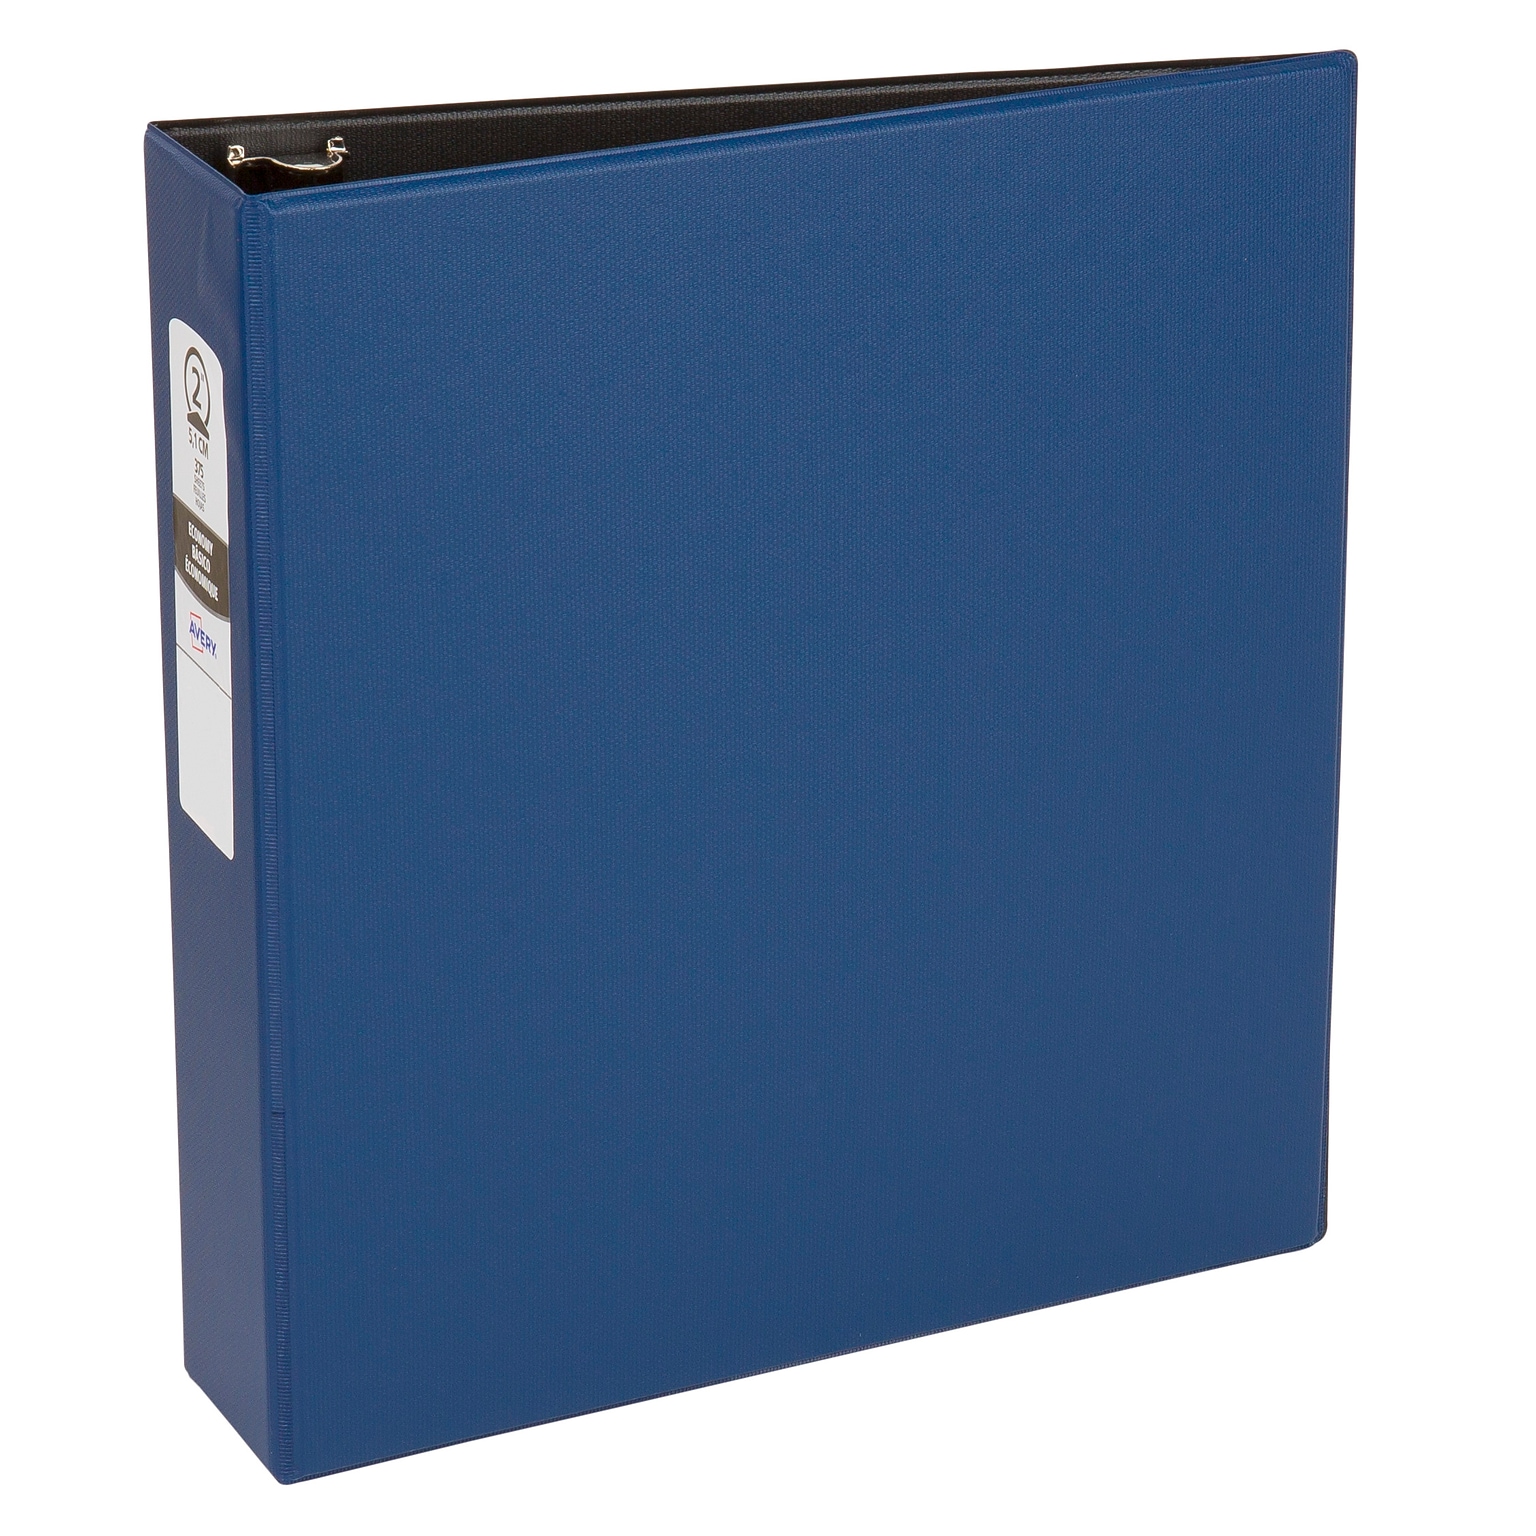 Avery Economy 2 3-Ring Non-View Binders, Round Ring, Blue/Black Interior (03500)